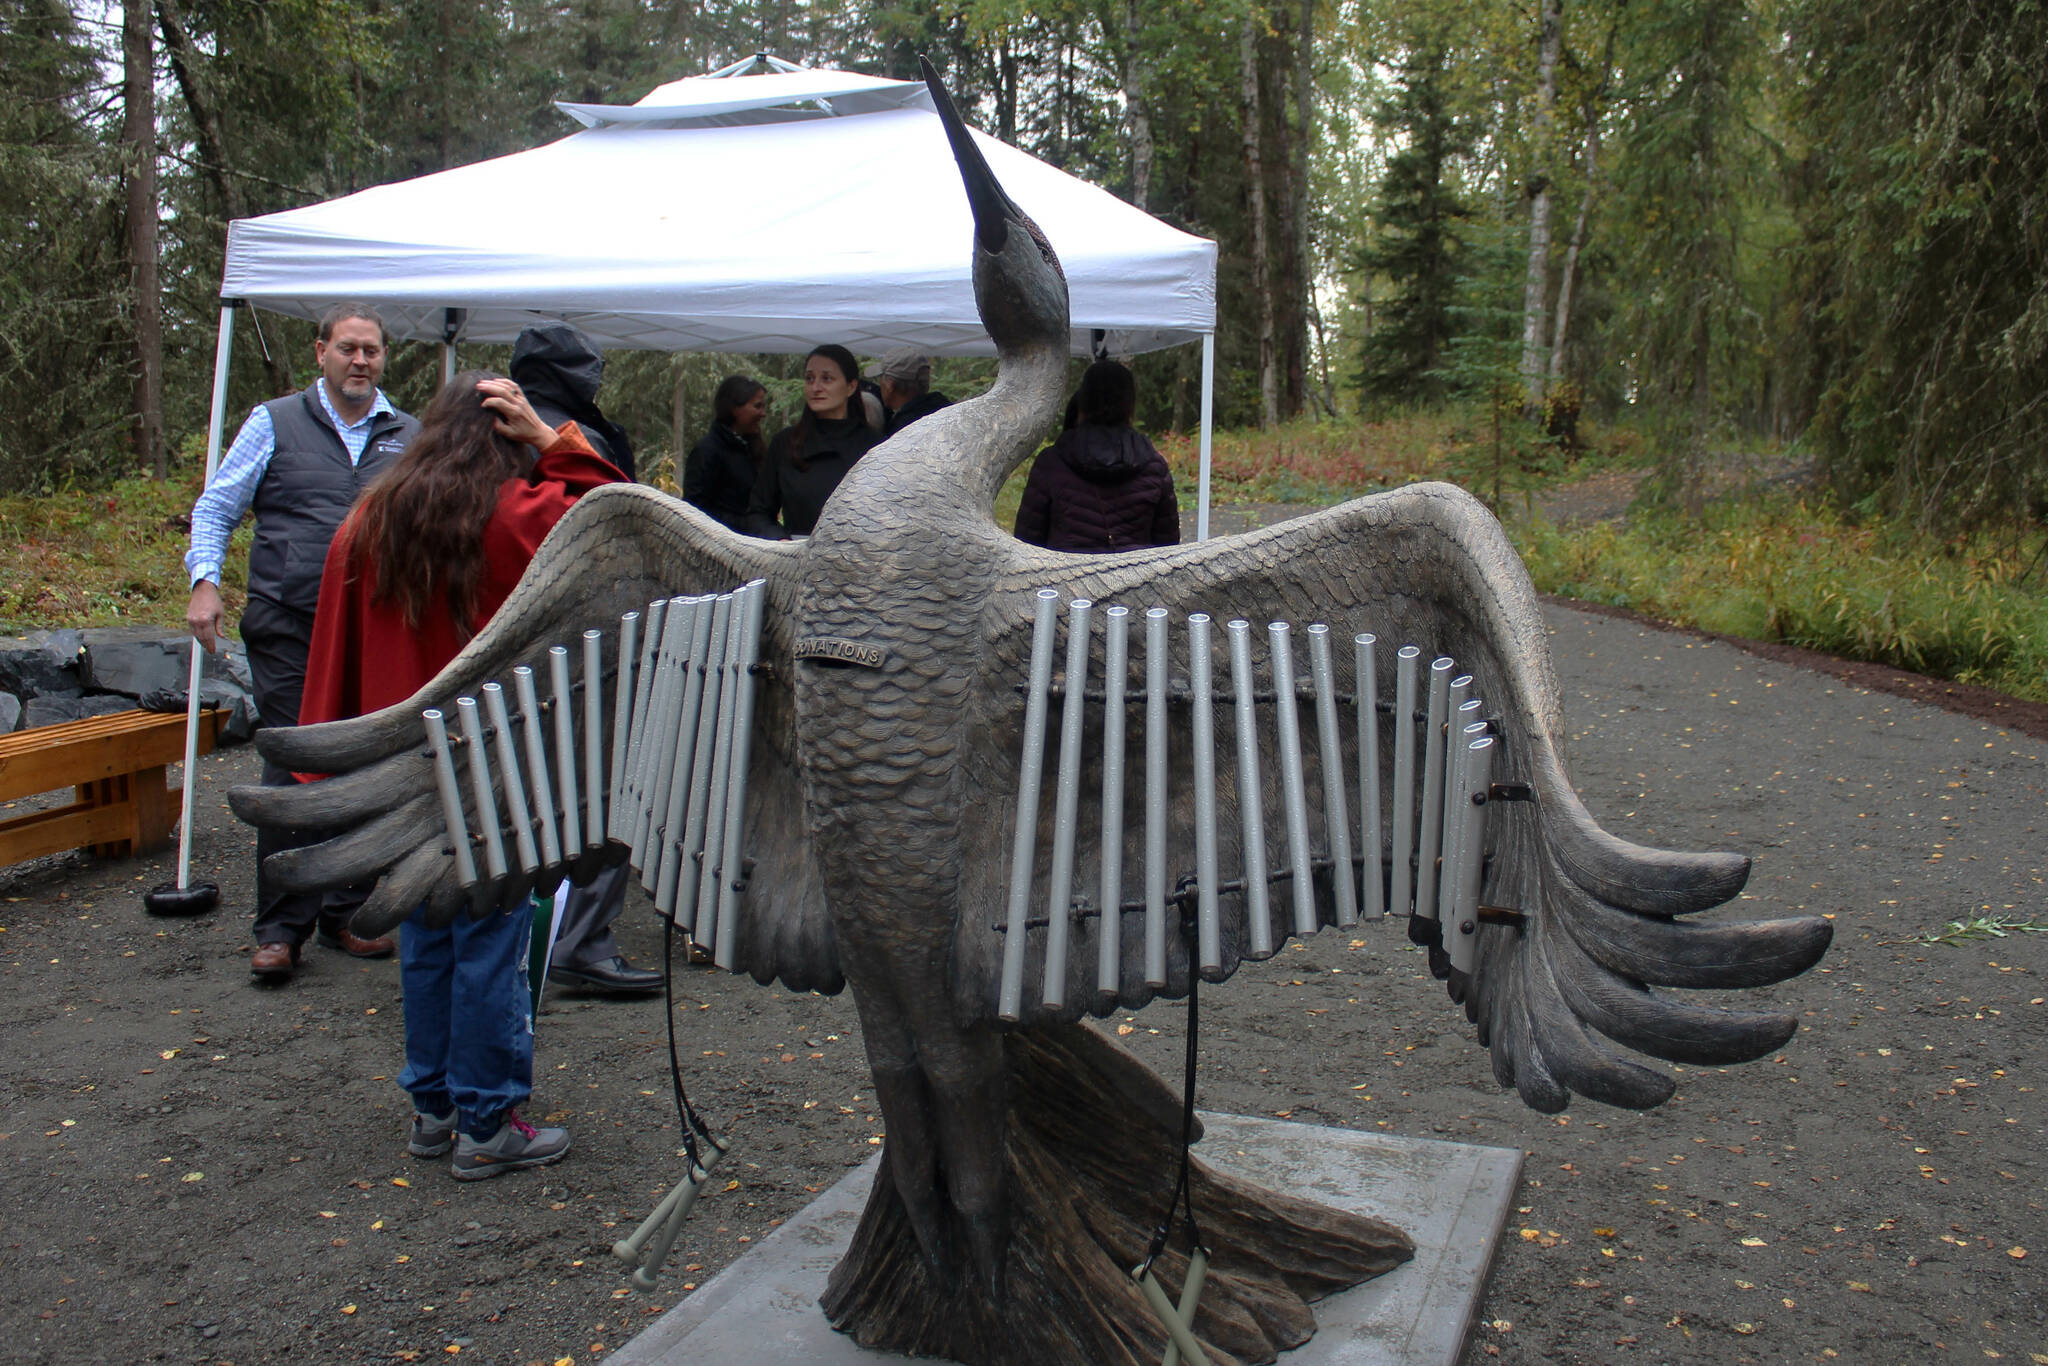 A peace crane statue unveiled as part of the grand opening and dedication of the Kenai Peninsula Peace Crane Garden Trails is seen on Thursday, Sept. 8, 2022, in Soldotna, Alaska. (Ashlyn O’Hara/Peninsula Clarion)